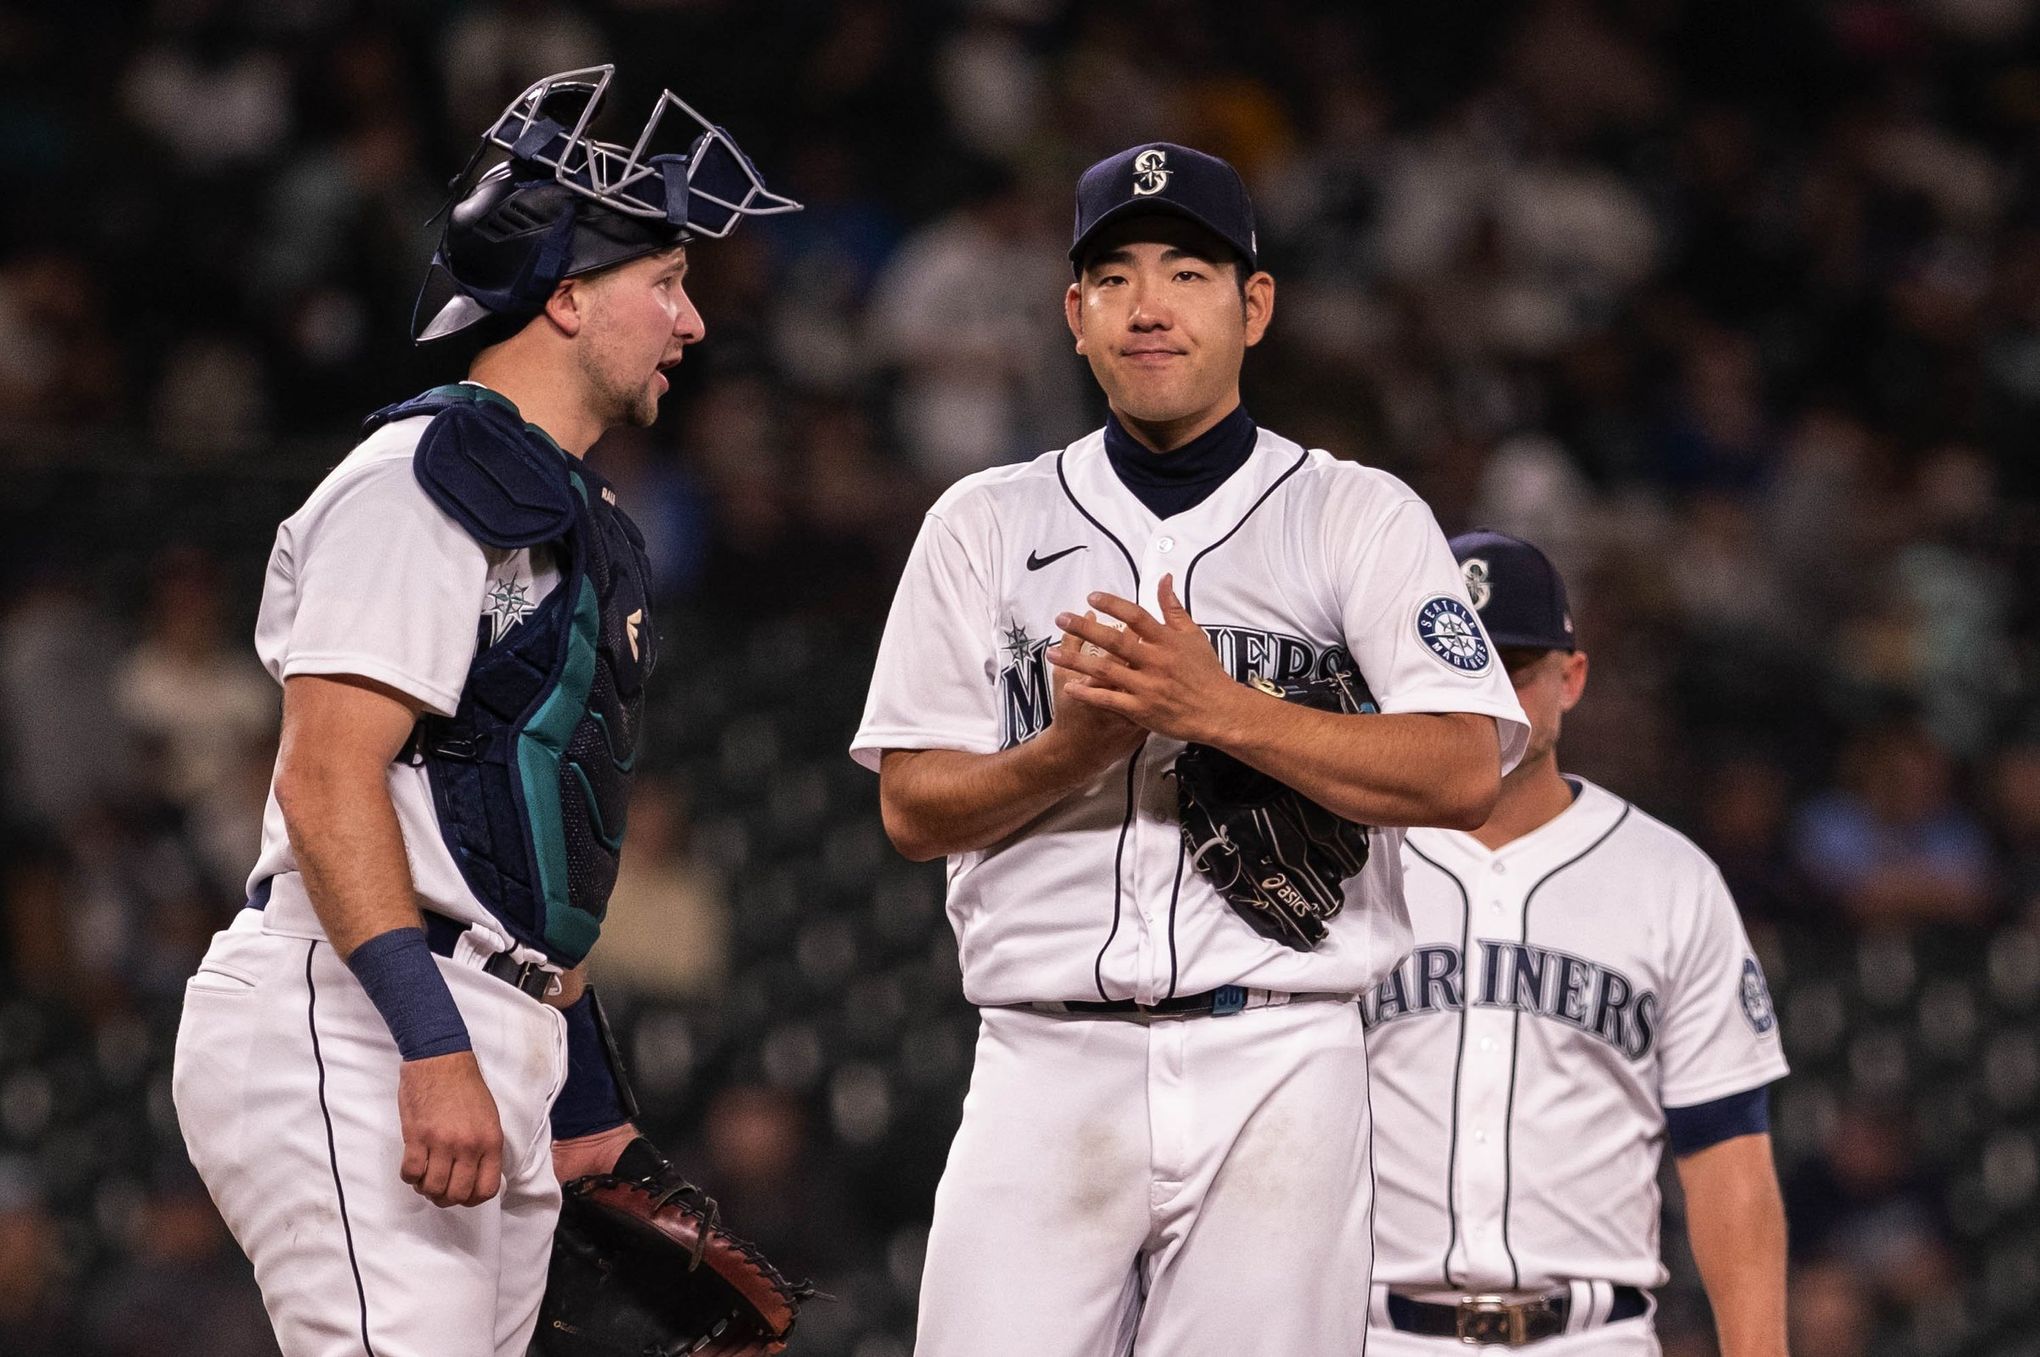 Mariners Renew PDC Agreements with Minor League Affiliates, by Mariners PR